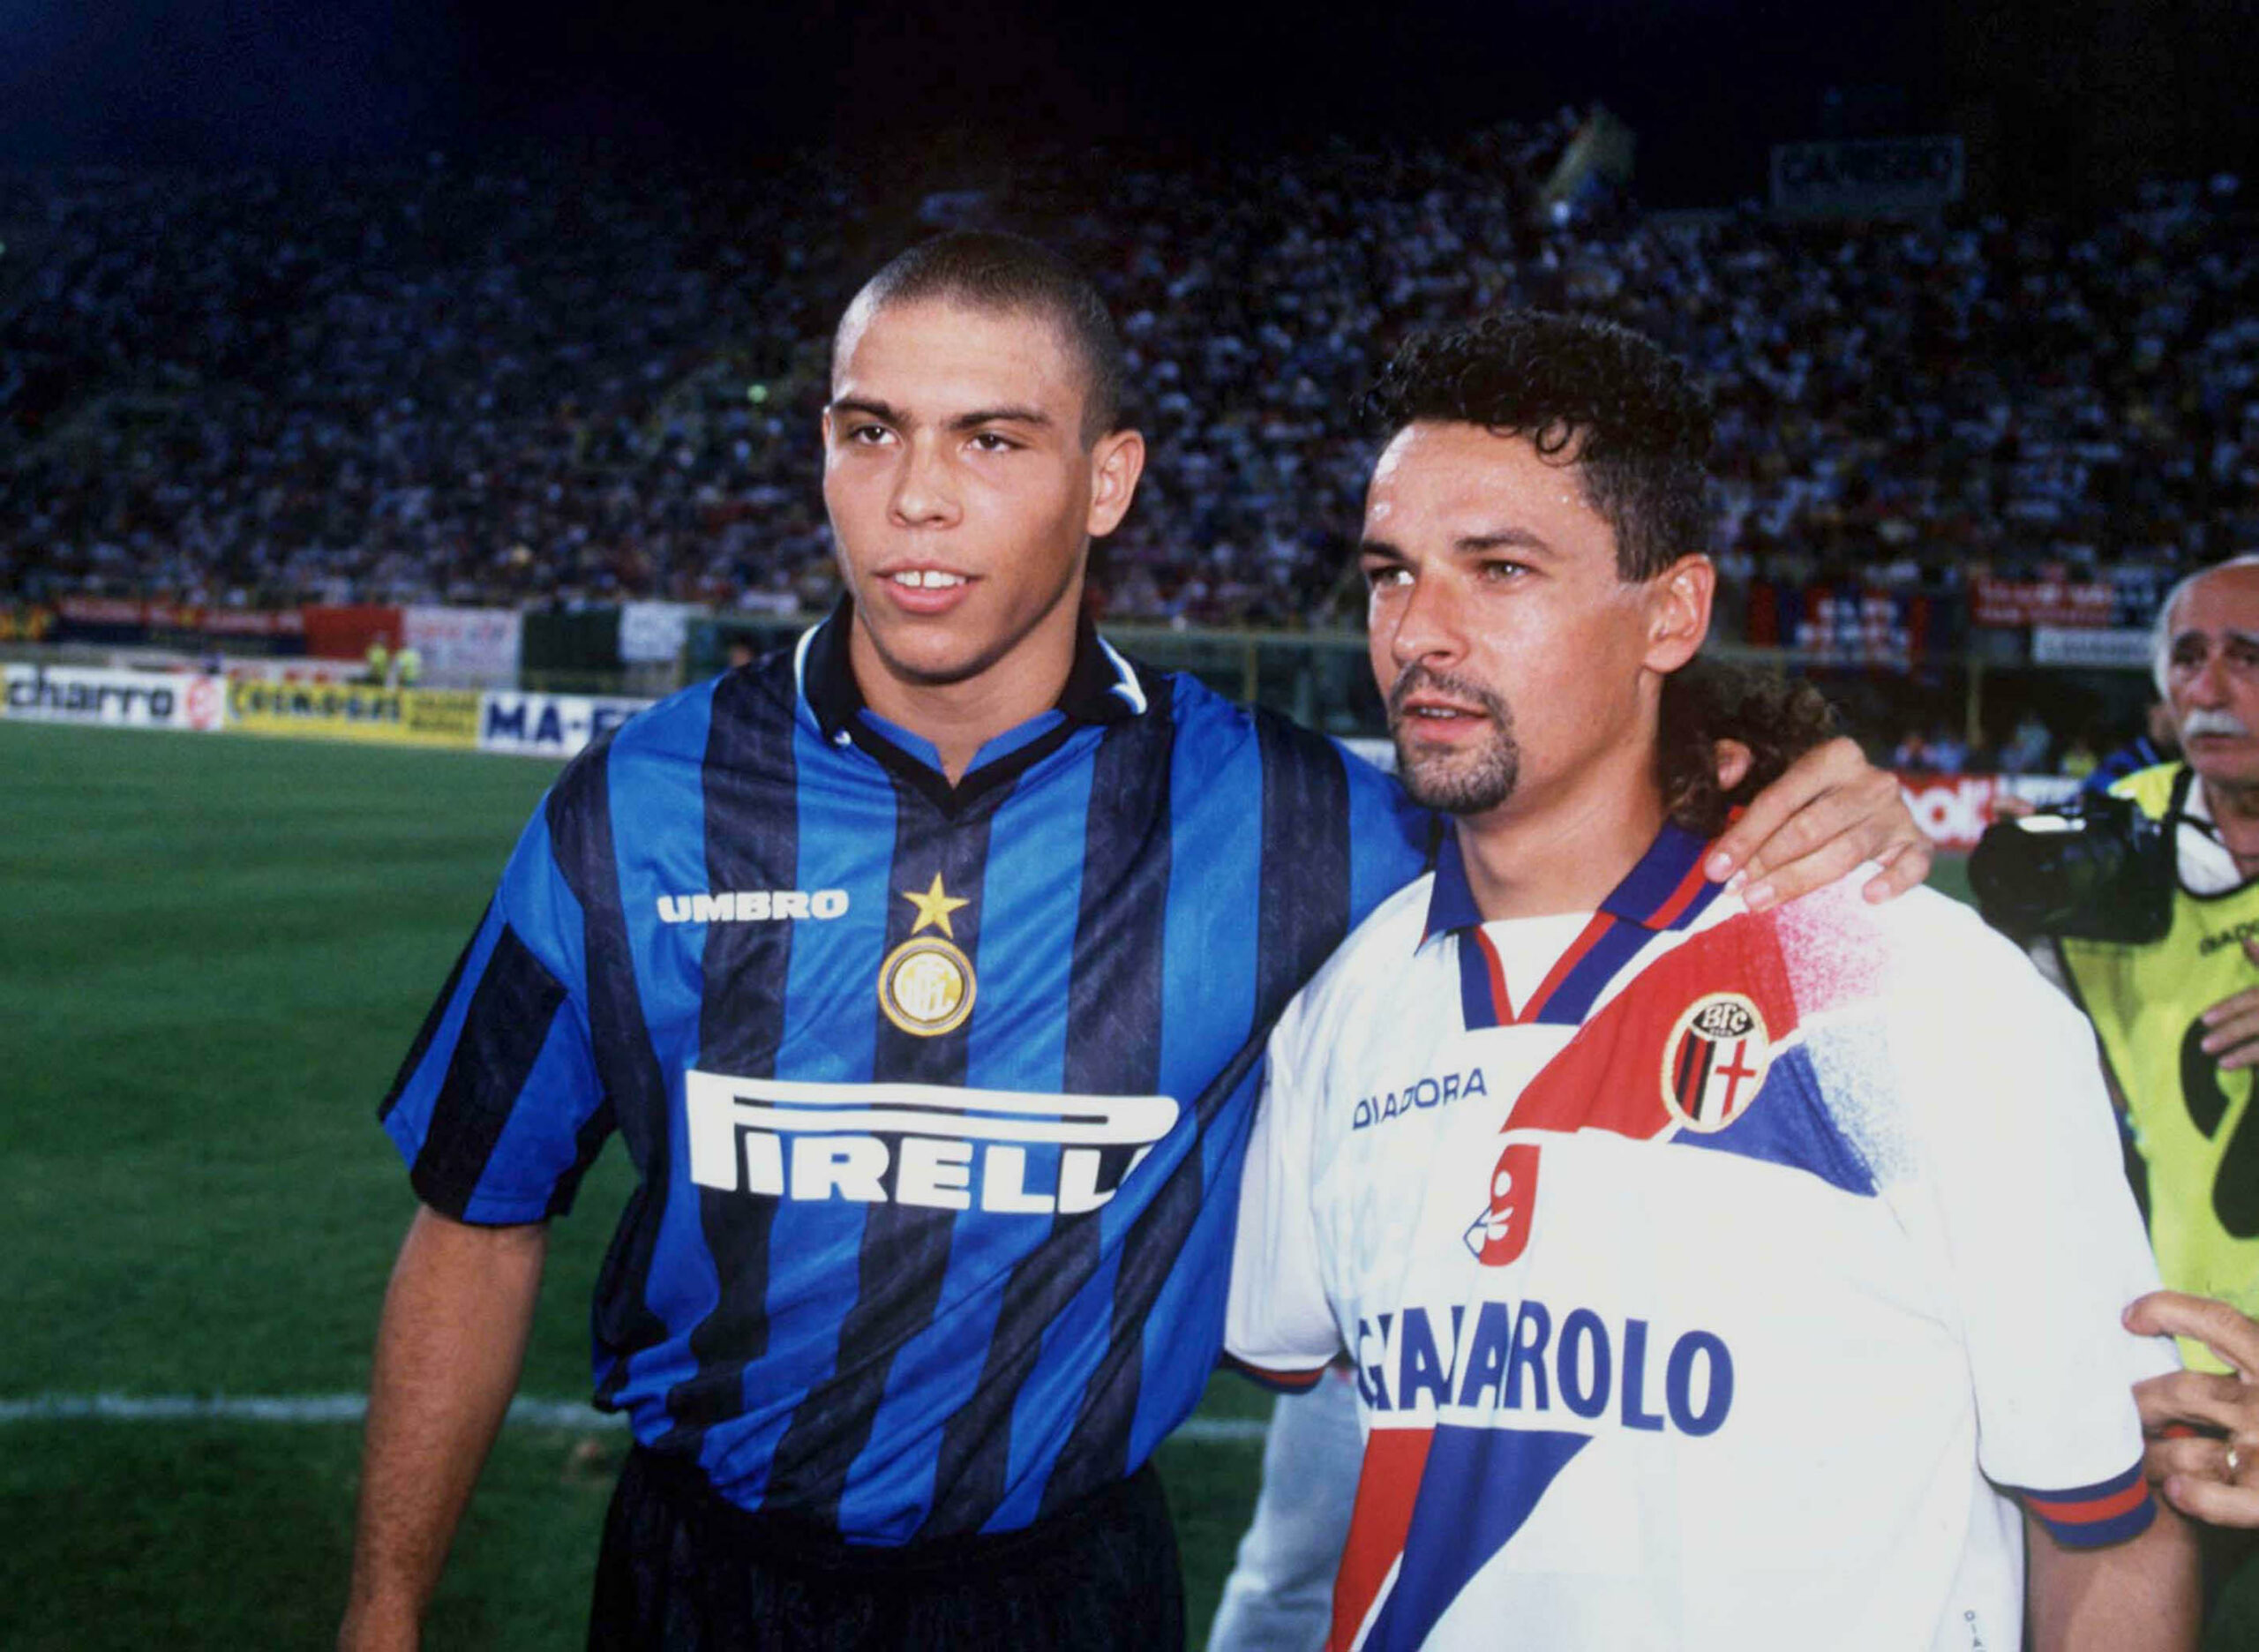 The Serie A’s 10 all-time top scorers and Ronaldo’s records